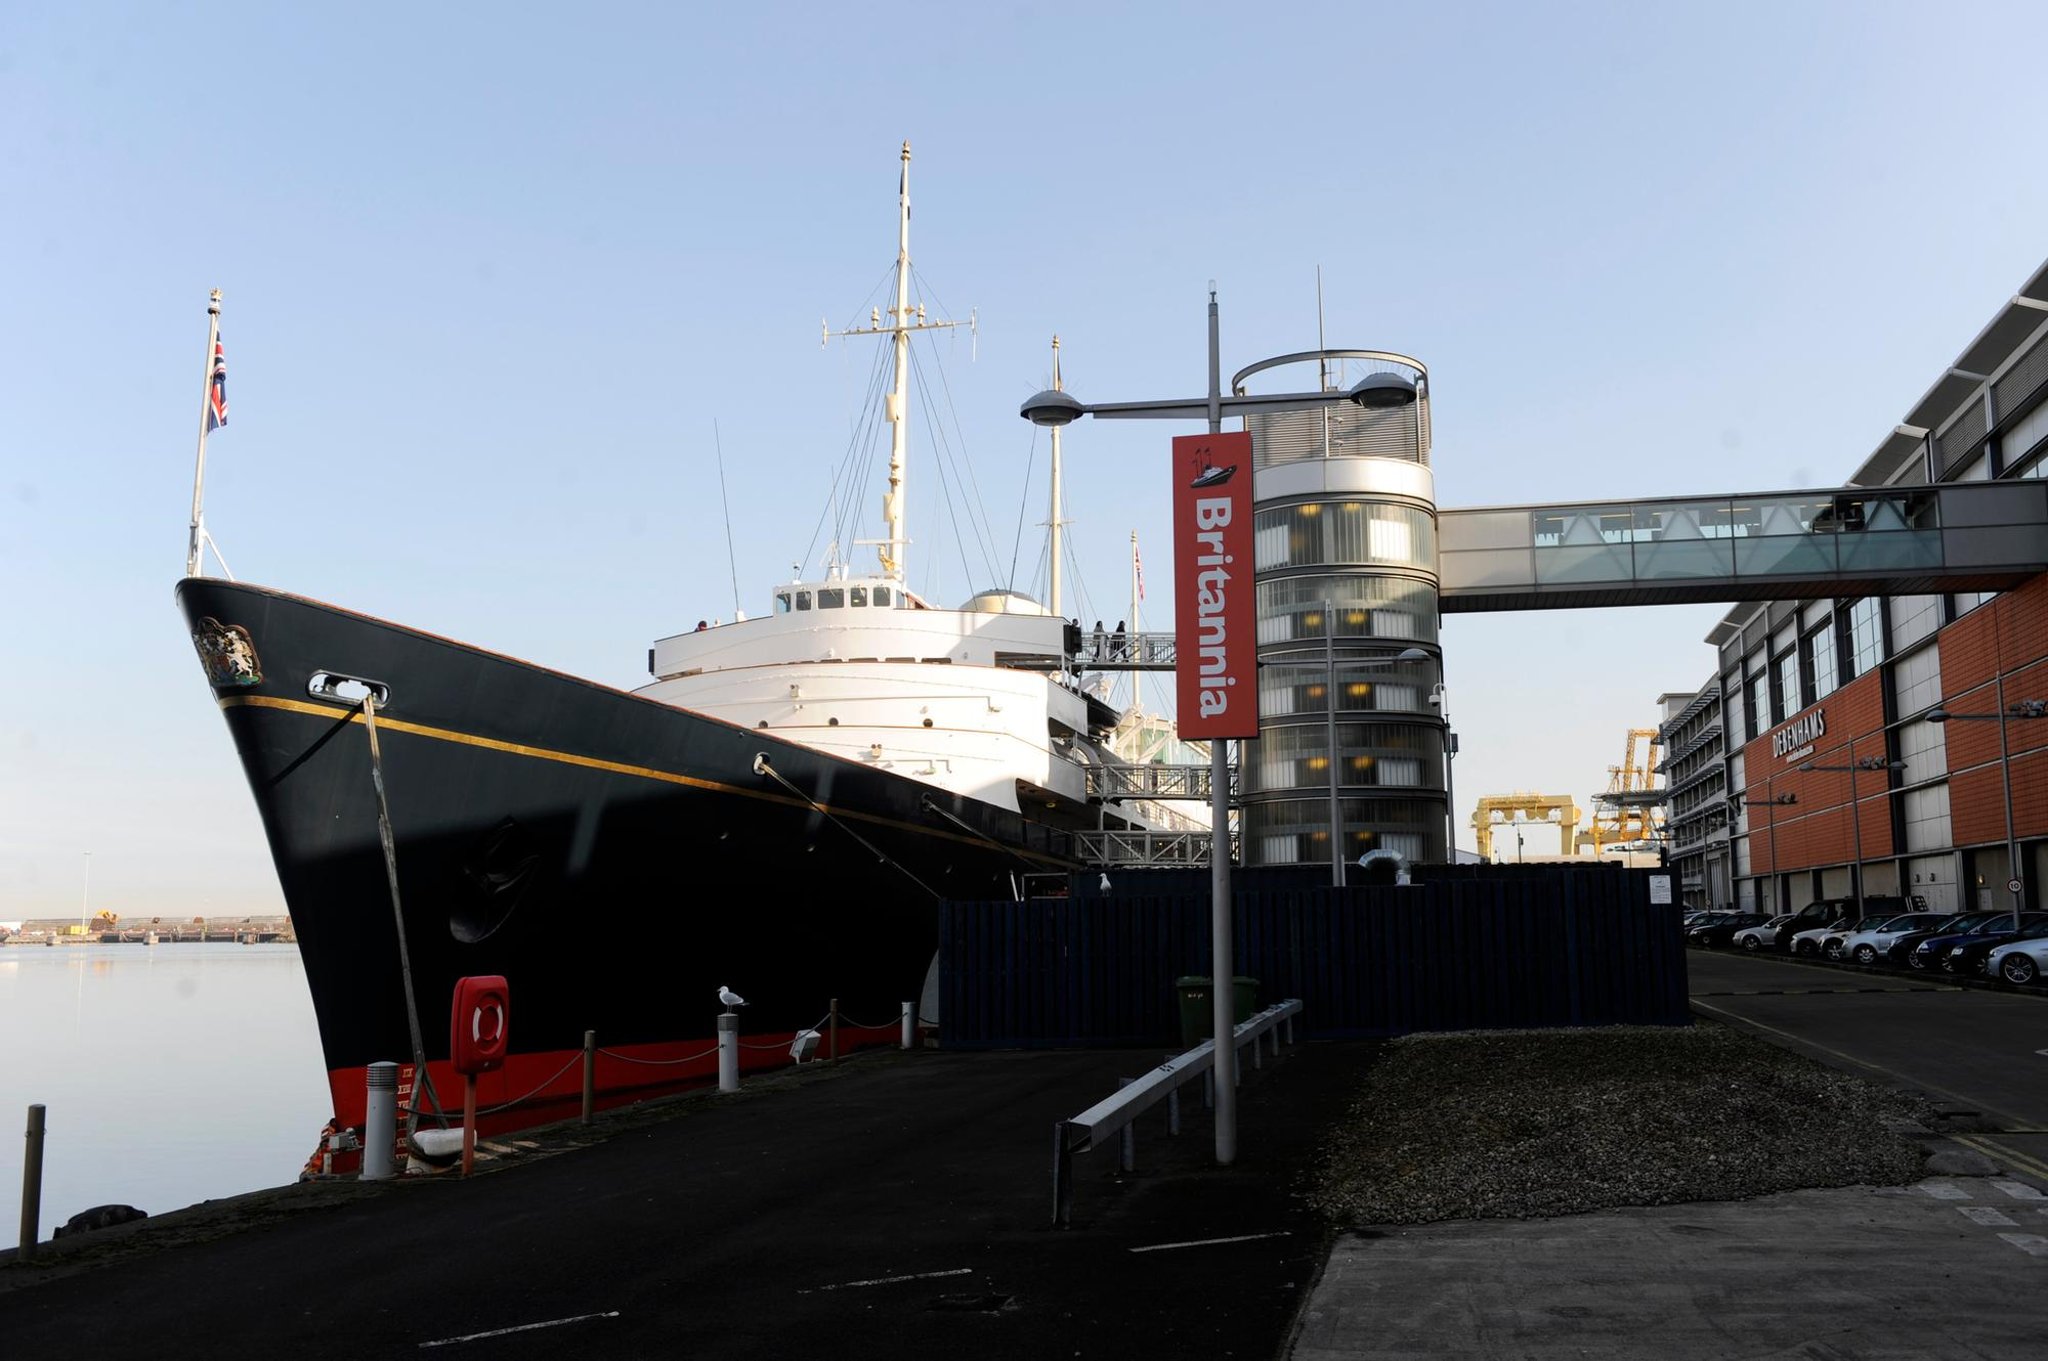 New UK flagship: Successor to Royal Yacht Britannia to promote Britain around the world